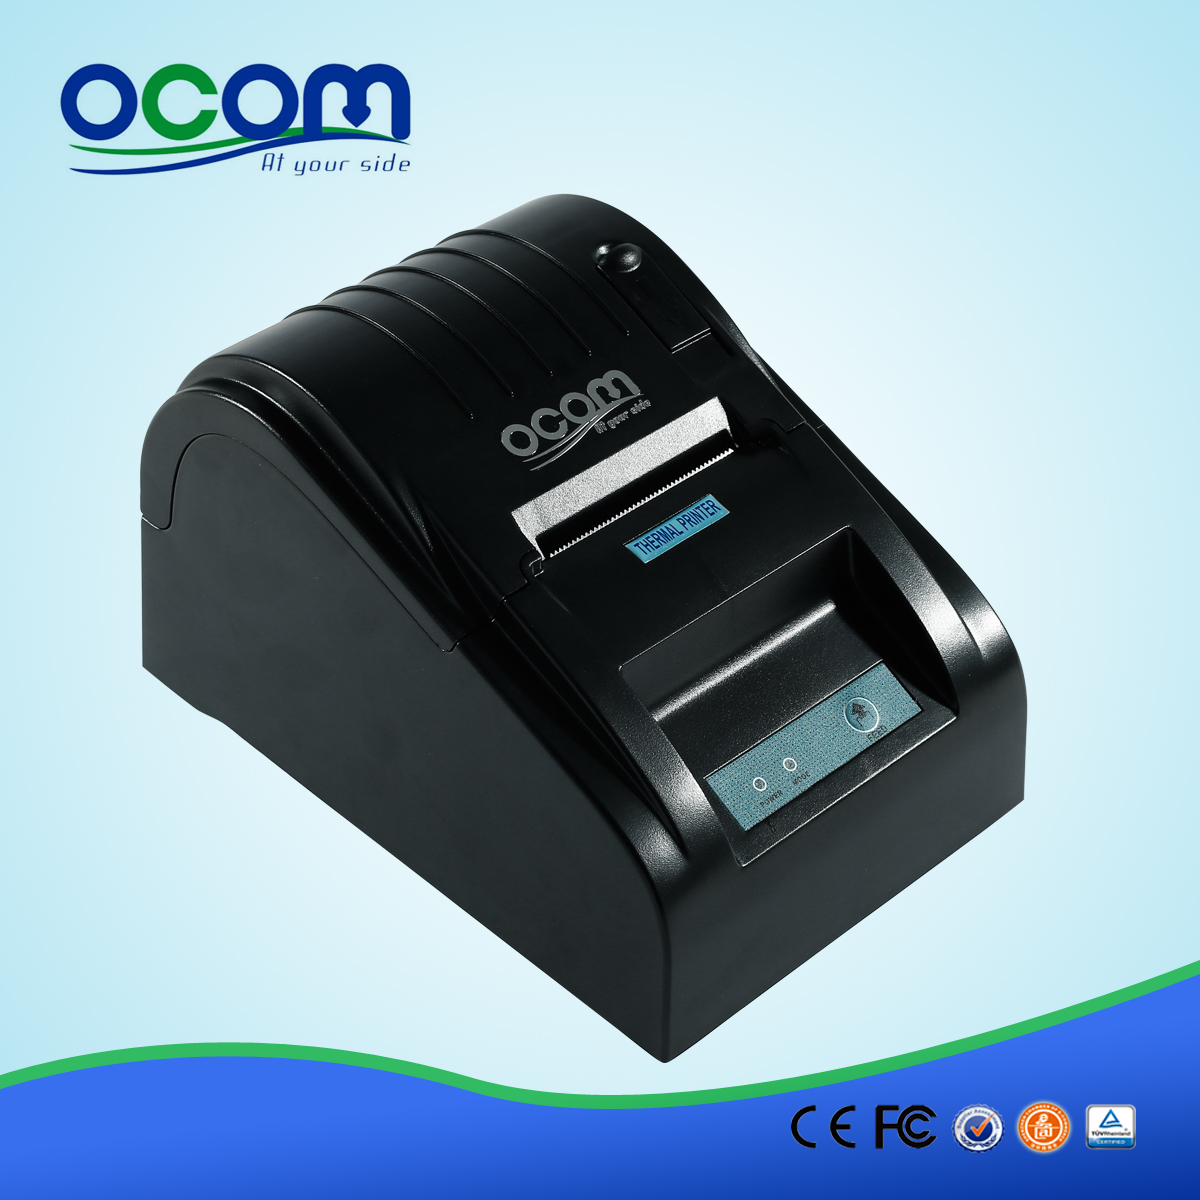 58mm Android usb reçu thermique printer-- OCPP-585